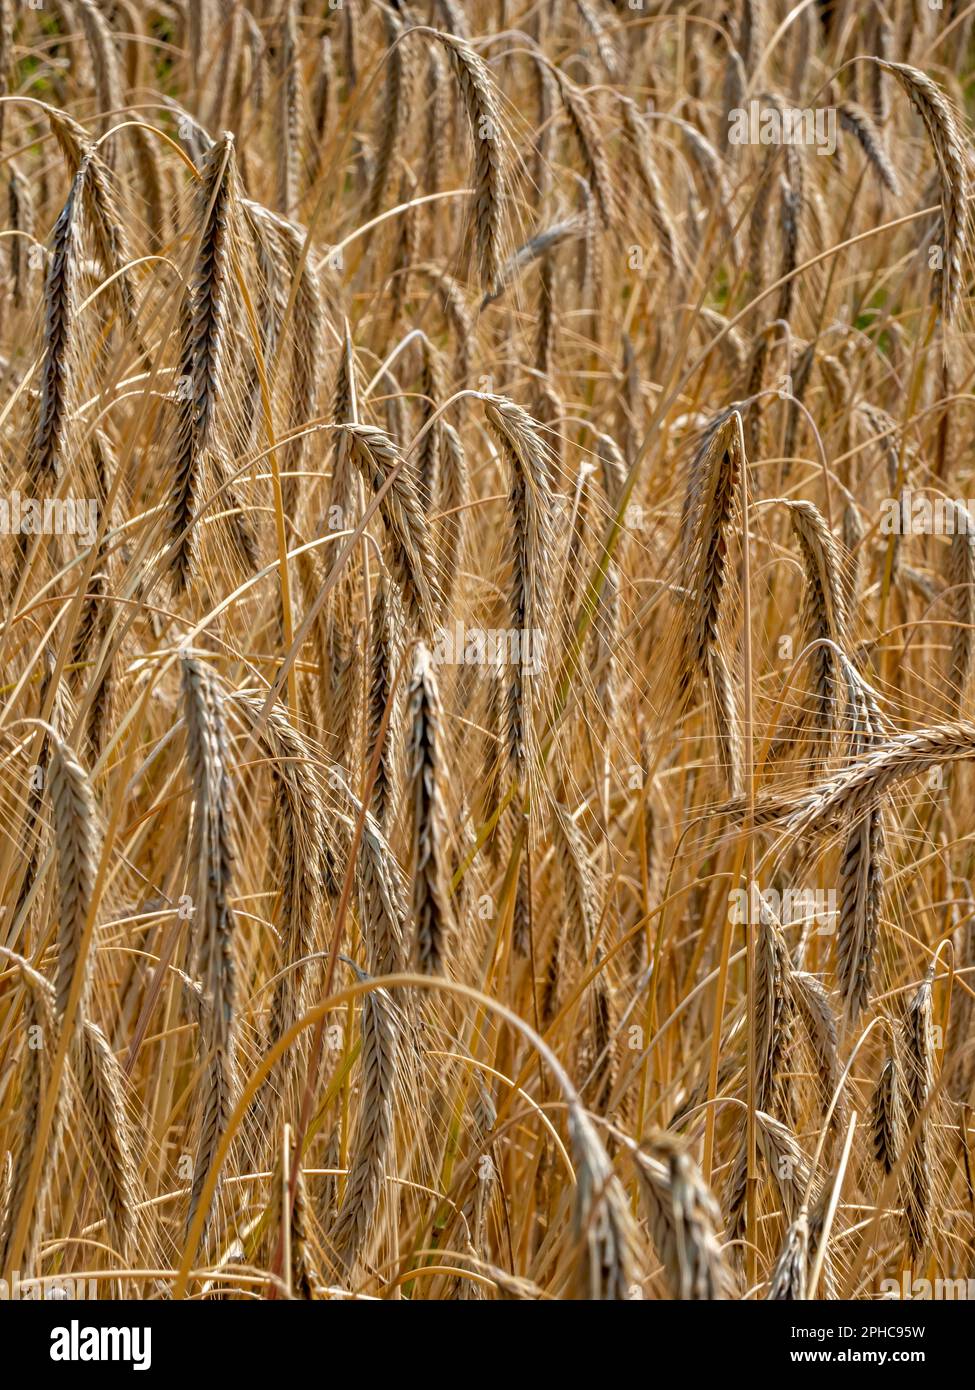 A part of a cereal field of the genetic hybrid triticum x secale with ripe, durable grain shines under July sun, showcasing the role of genetics. Stock Photo